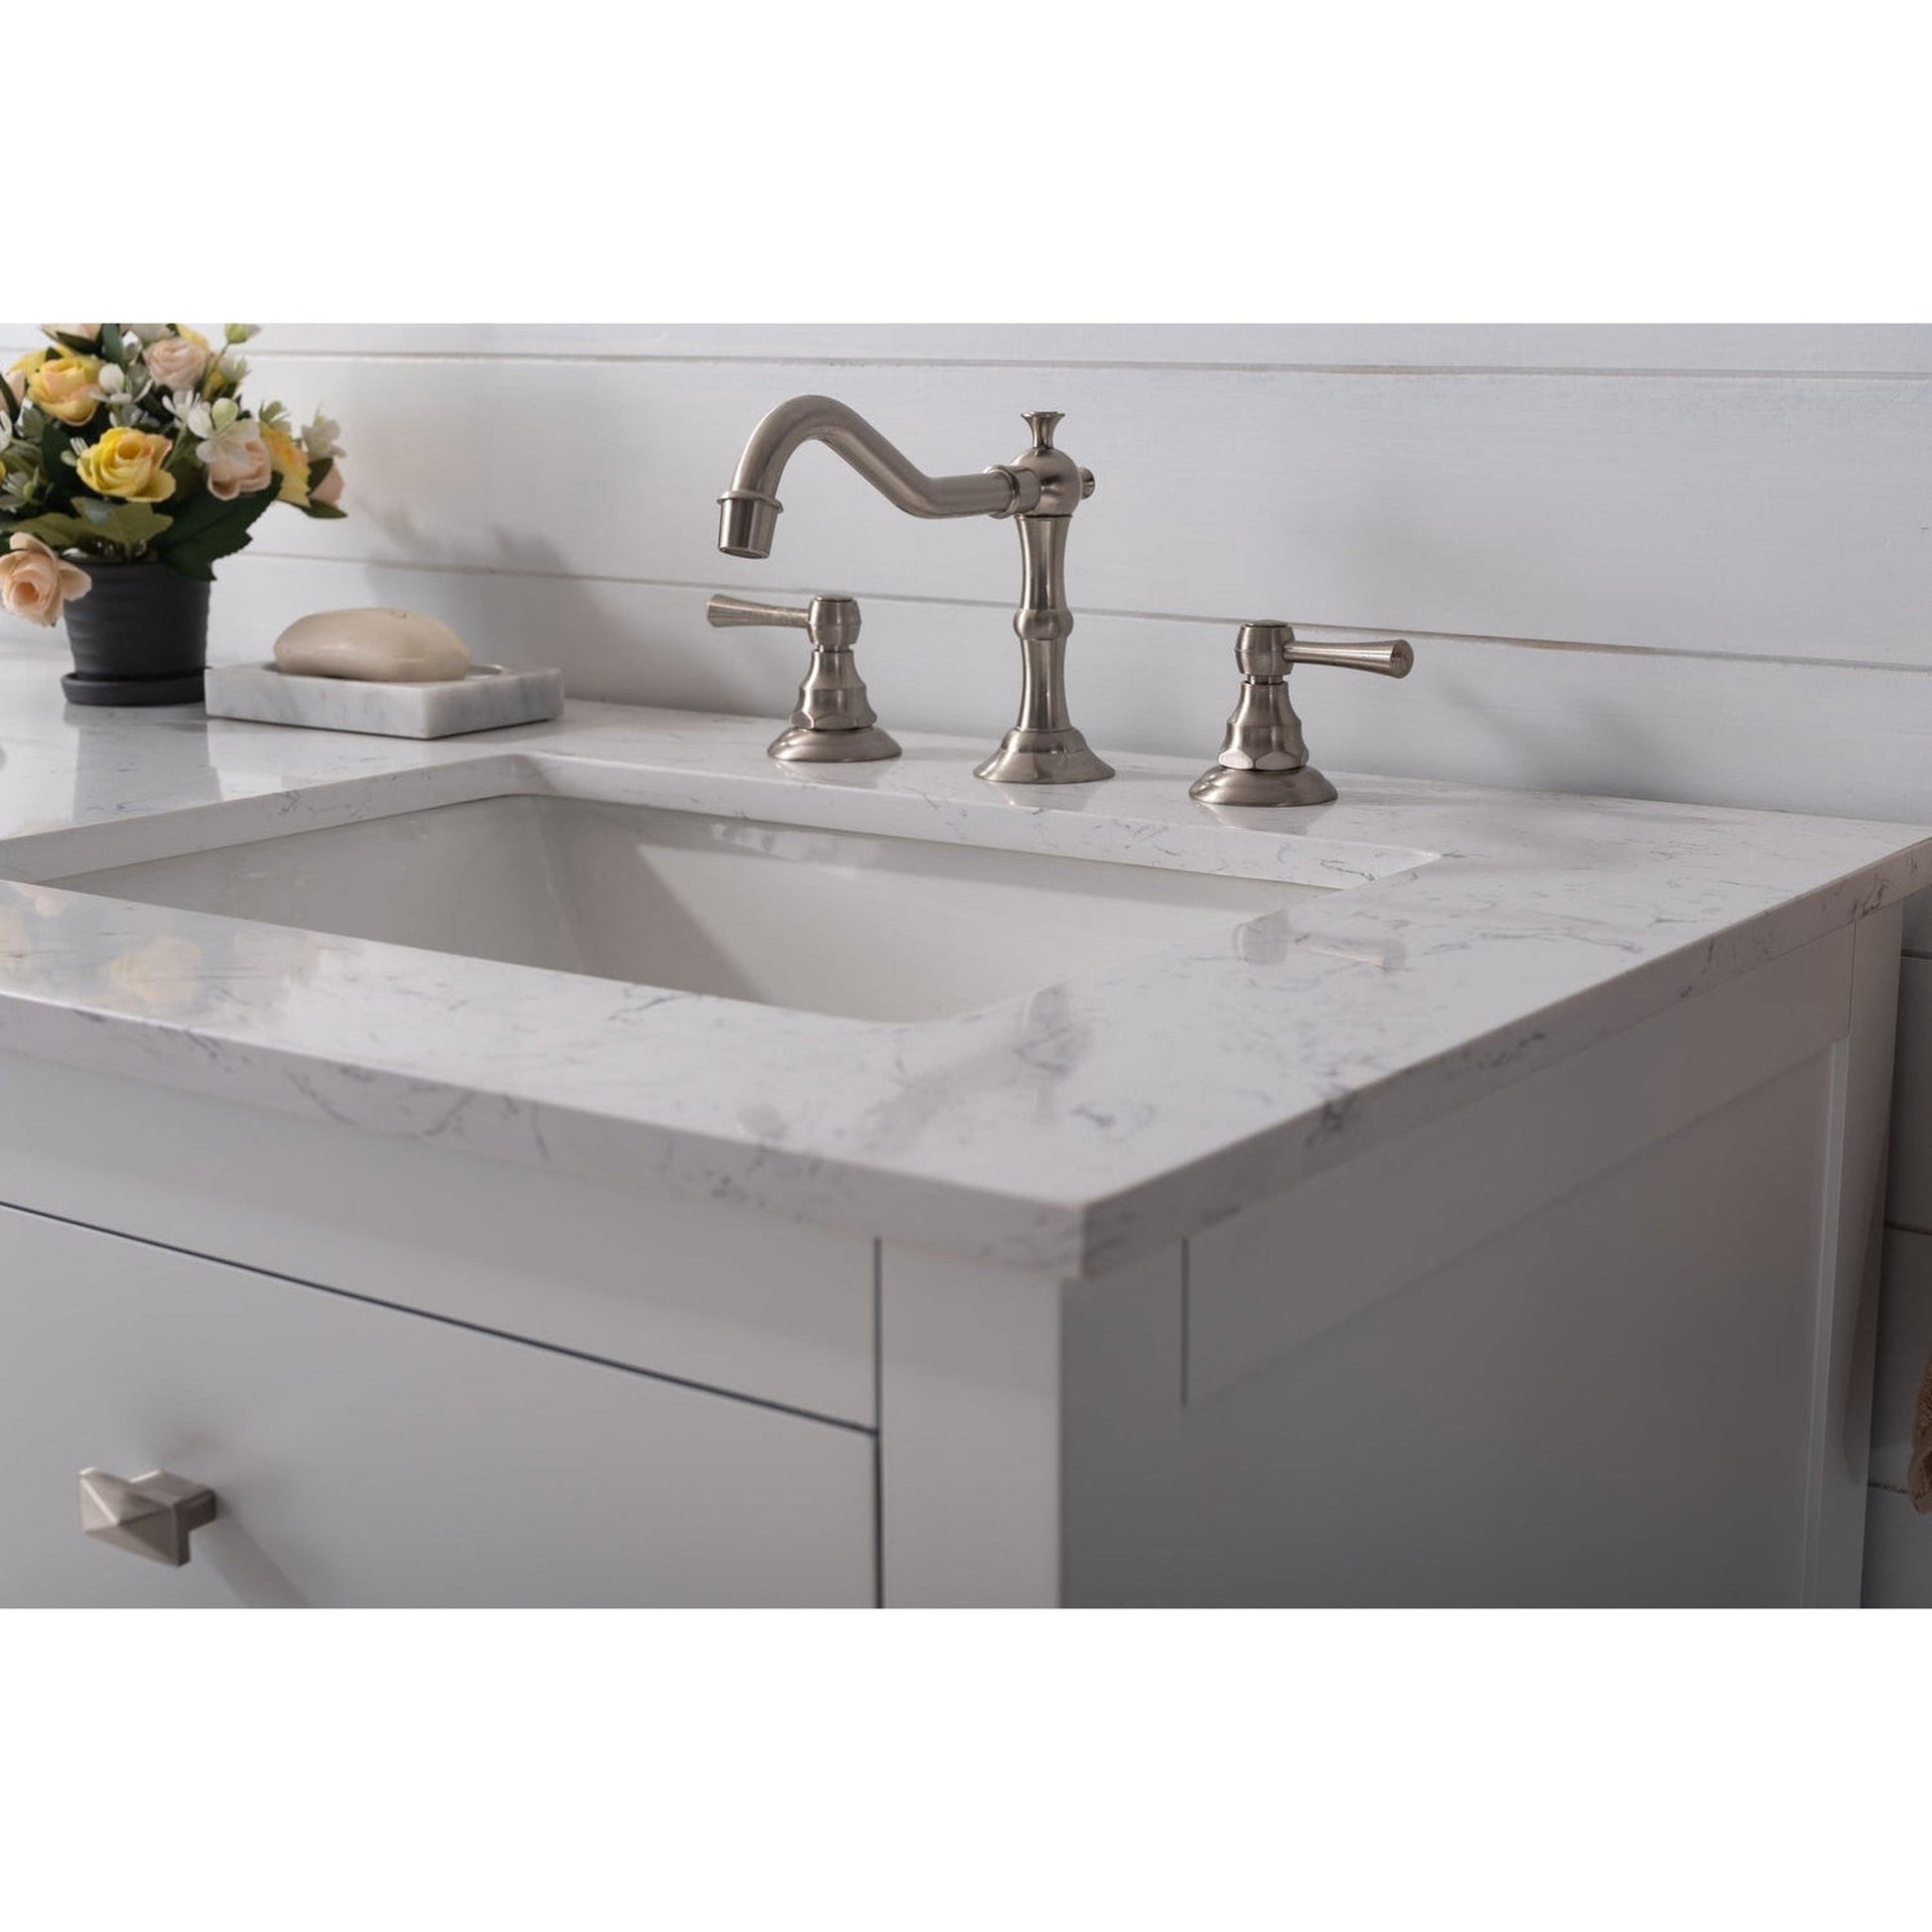 Eviva Totti Artemis 60" x 34" White Freestanding Bathroom Vanity With Carrara Style Man-made Stone Countertop and Double Undermount Sink